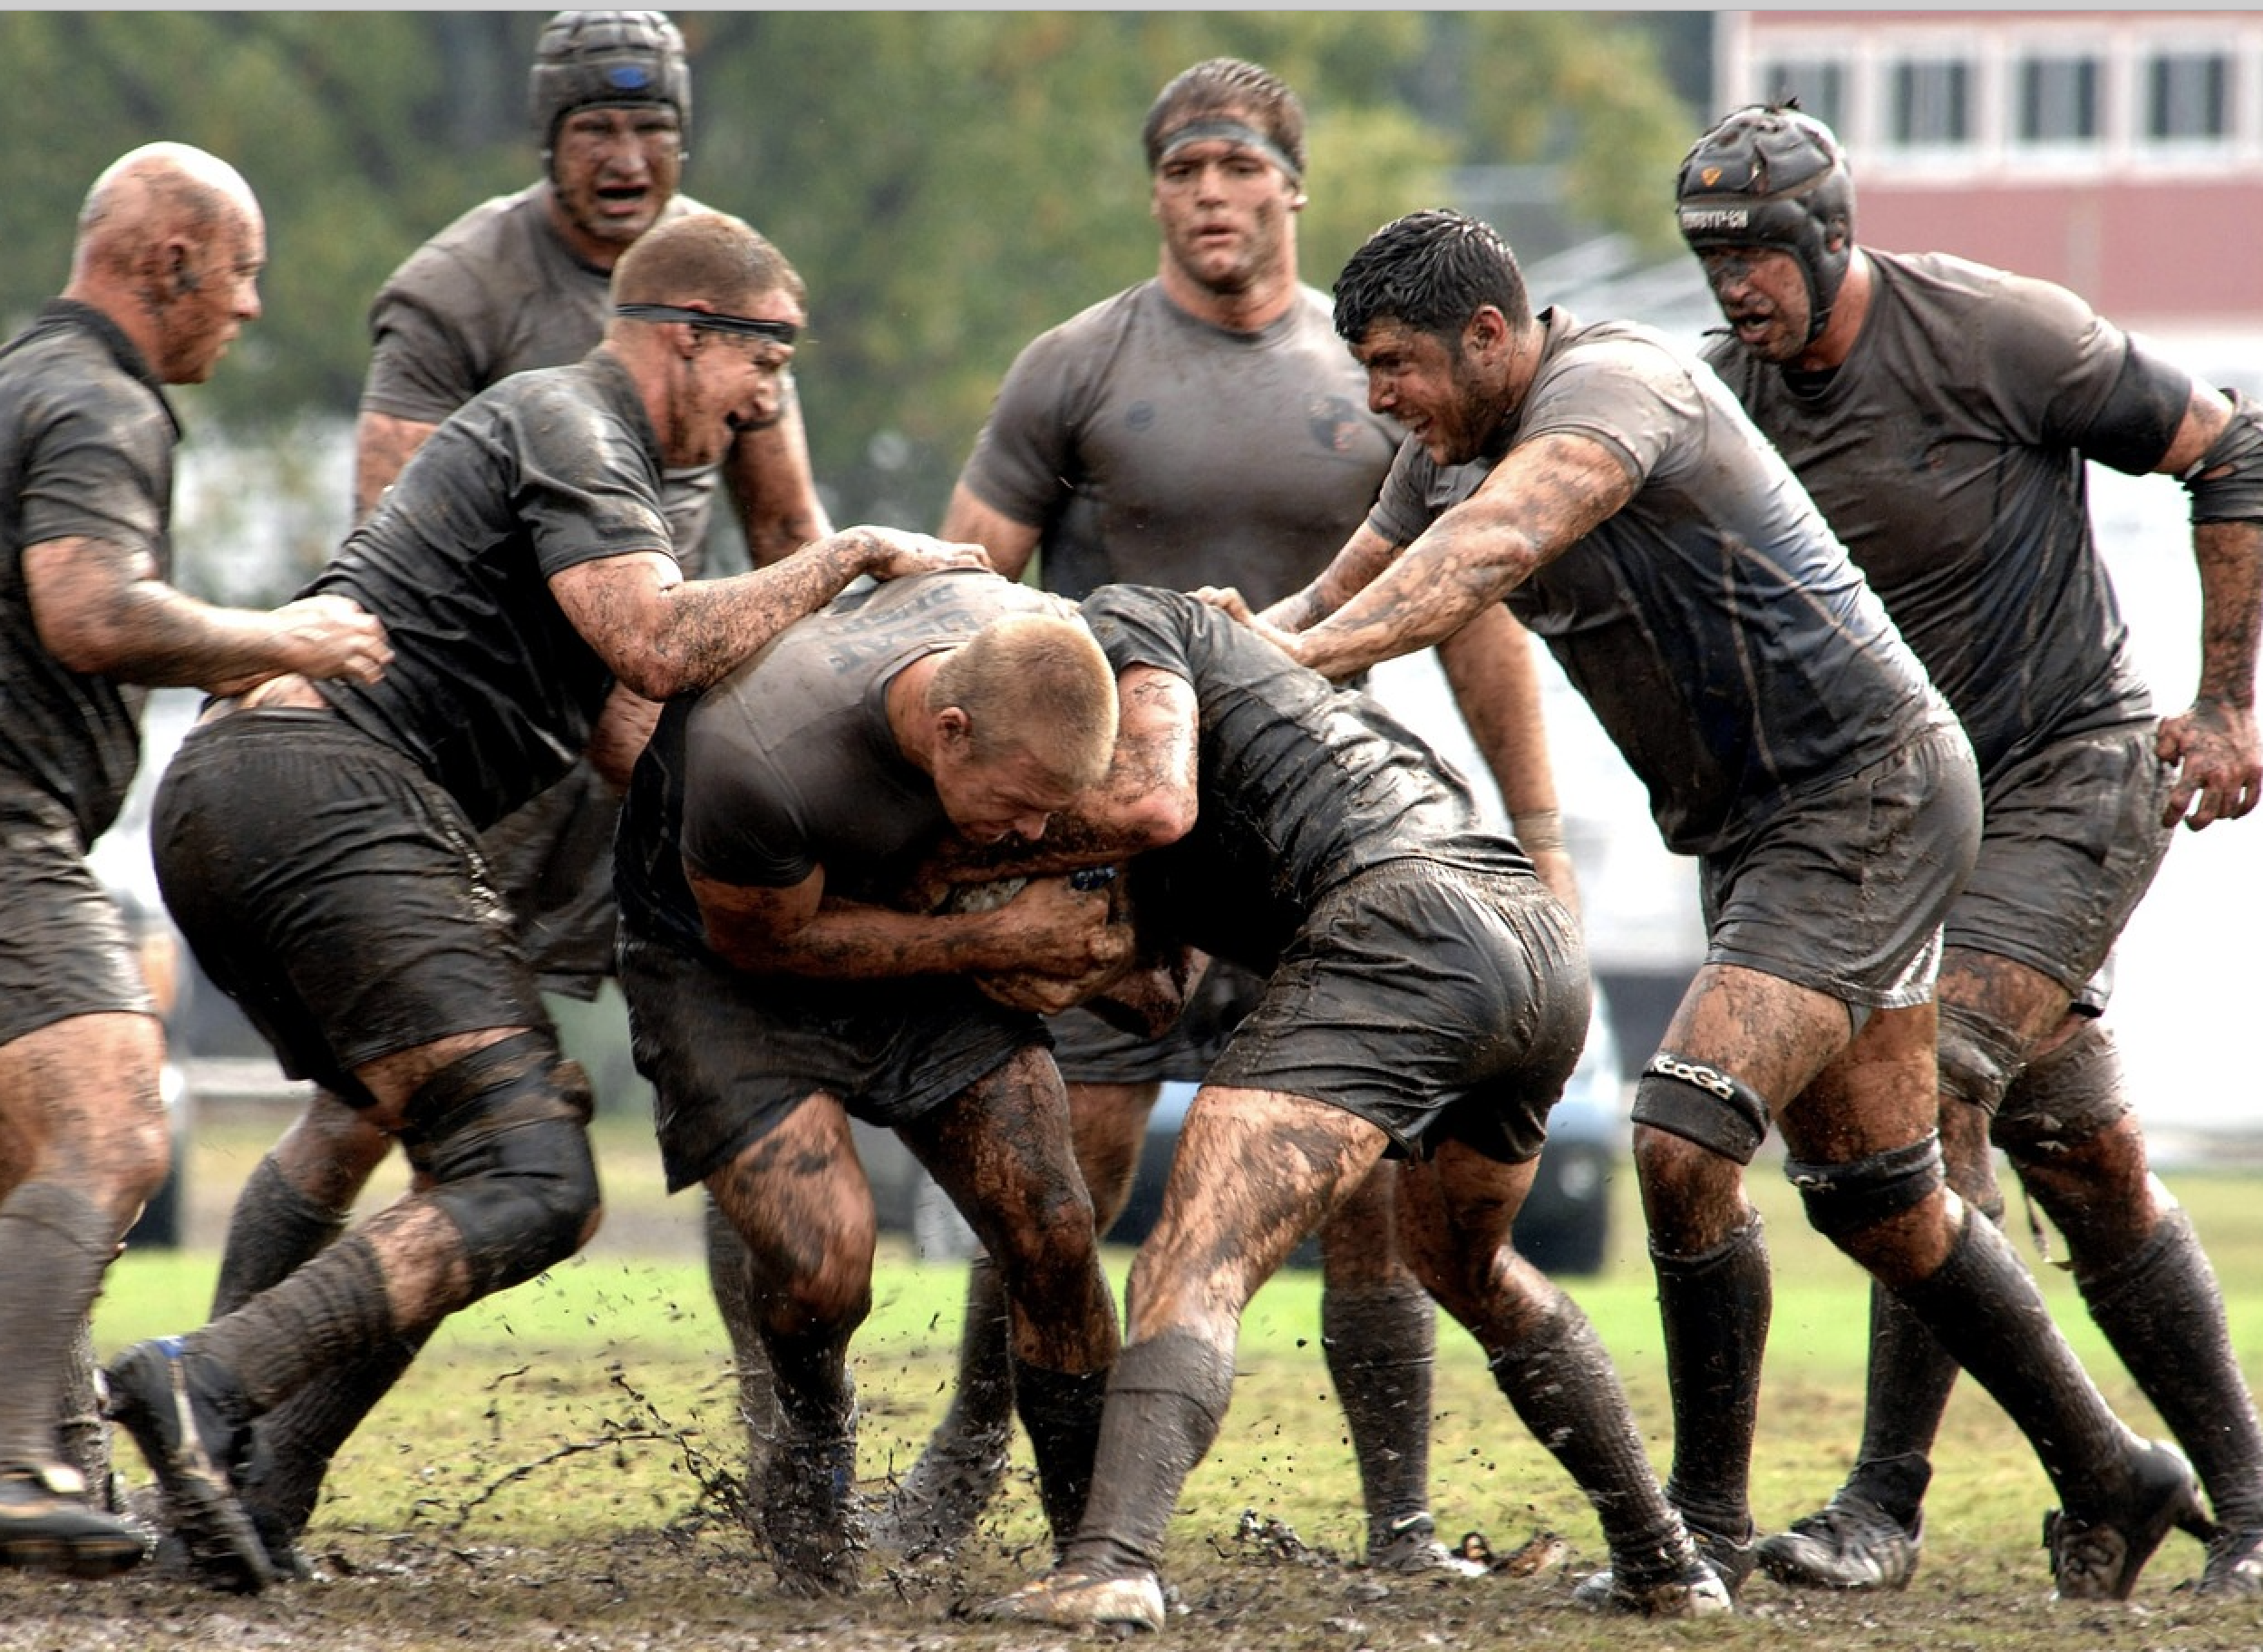 Tackling rugby players covered in mud who all have rugby insurance in case the worst happens, and their clubhouse is covered by rugby club insurance. Their club has signed up for an affiliate sports club insurance.